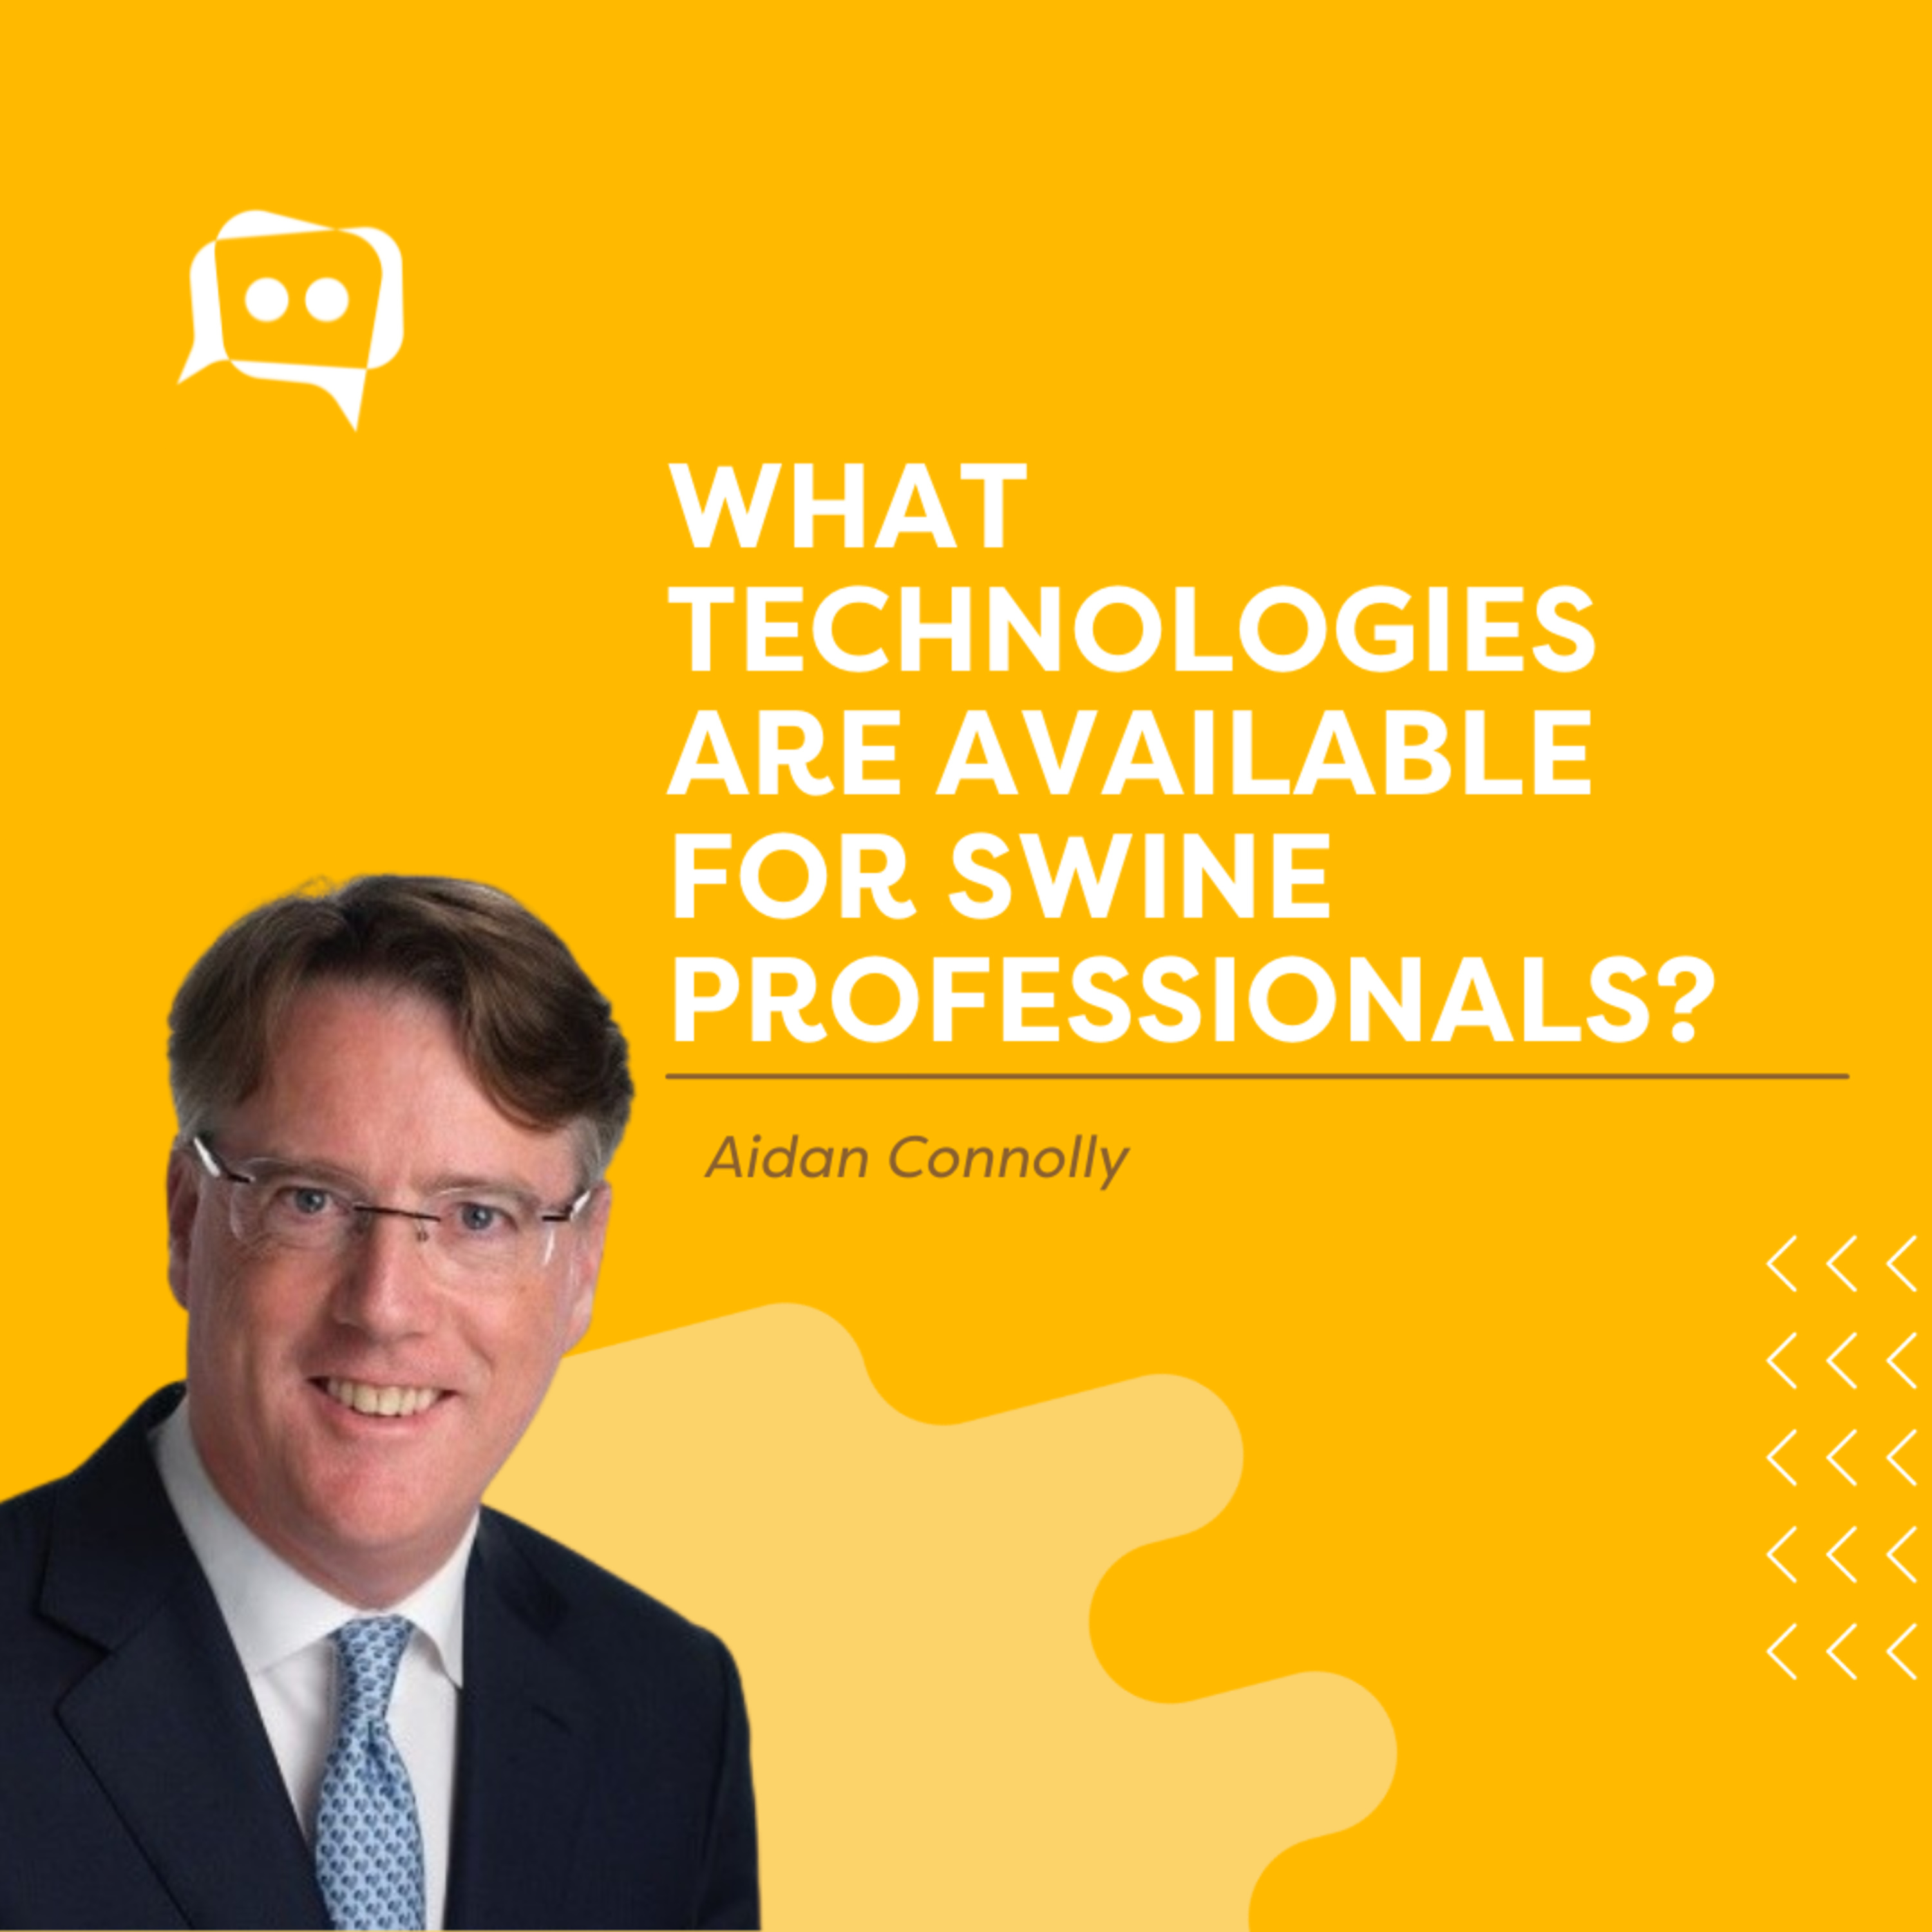 #SHORTS: What technologies are available for swine professionals? With Aidan Connolly